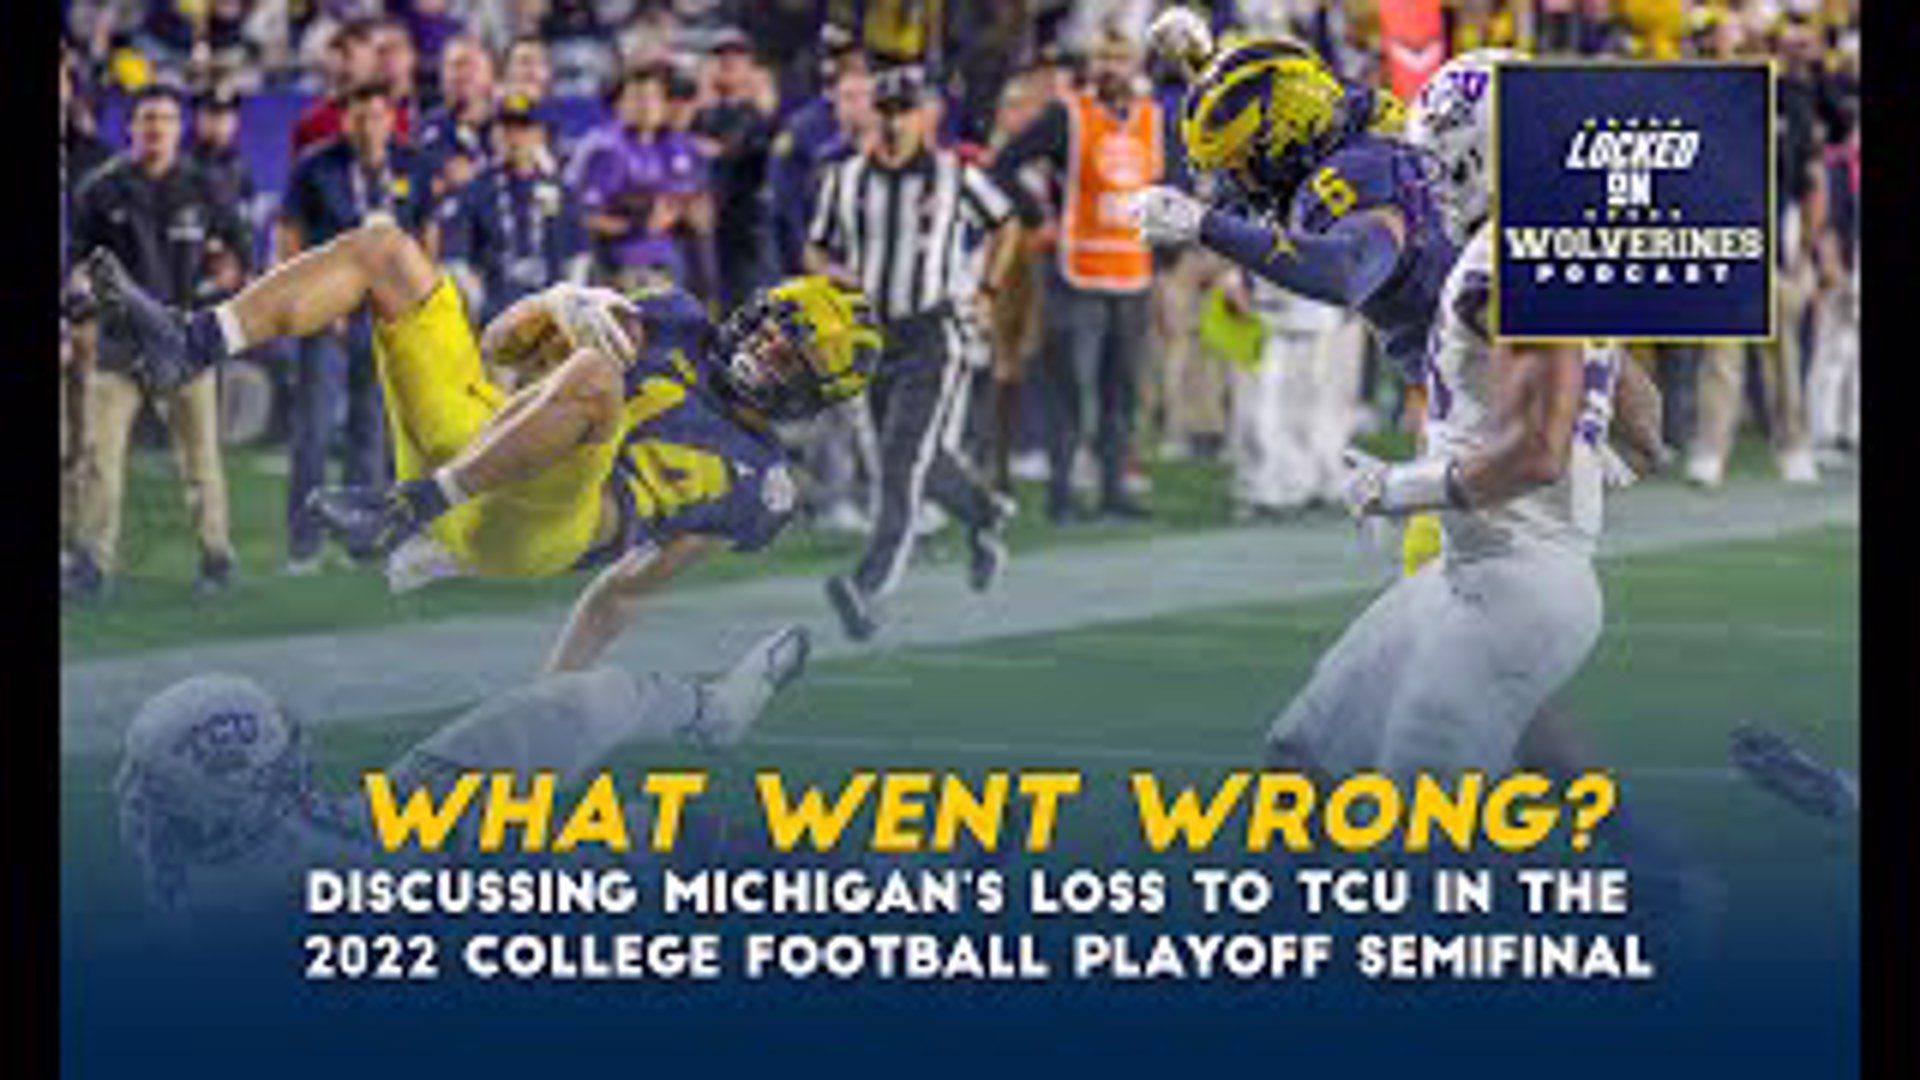 It was a mix between Murphy's Law and a comedy of errors by Michigan football when it lost 51-45 to TCU in the College Football Playoff semifinal in the Fiesta Bowl.